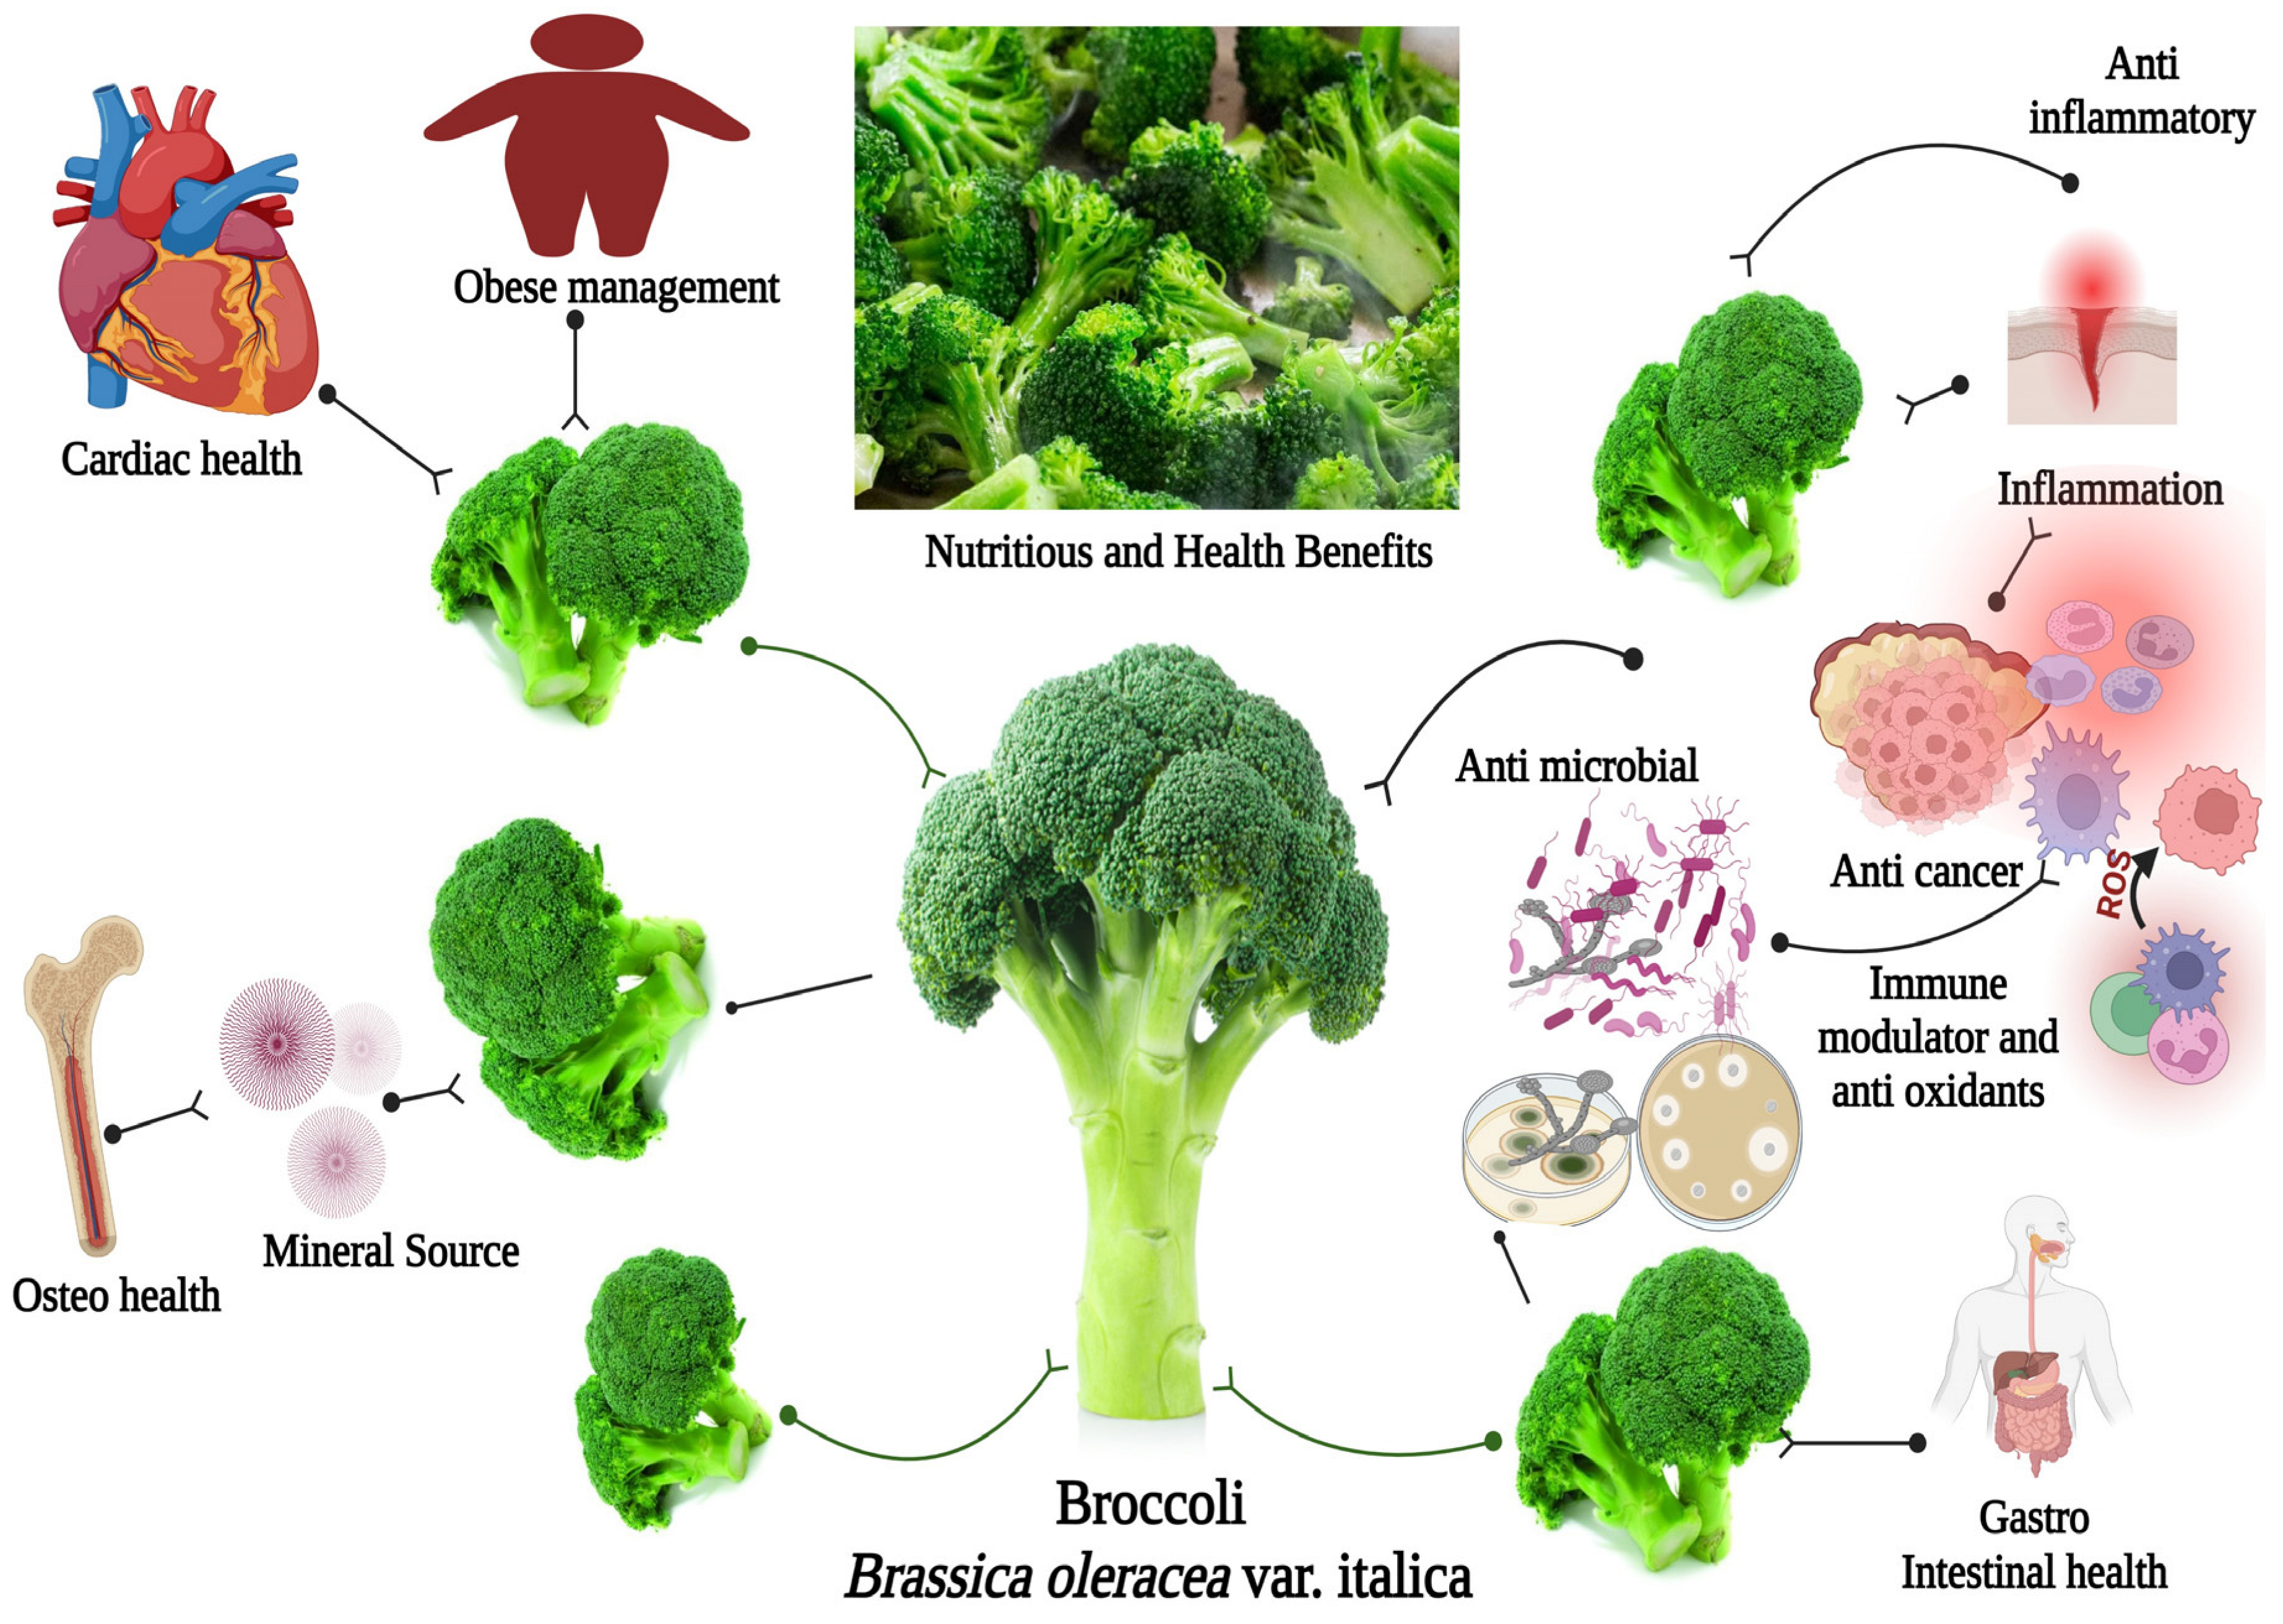 Antibiotics | Multi-Faceted Vegetable for Antimicrobial An Broccoli: Attributes, Properties Review Health: Nutritional Full-Text Its Abilities, Anti-inflammatory | A Free In-Depth and of